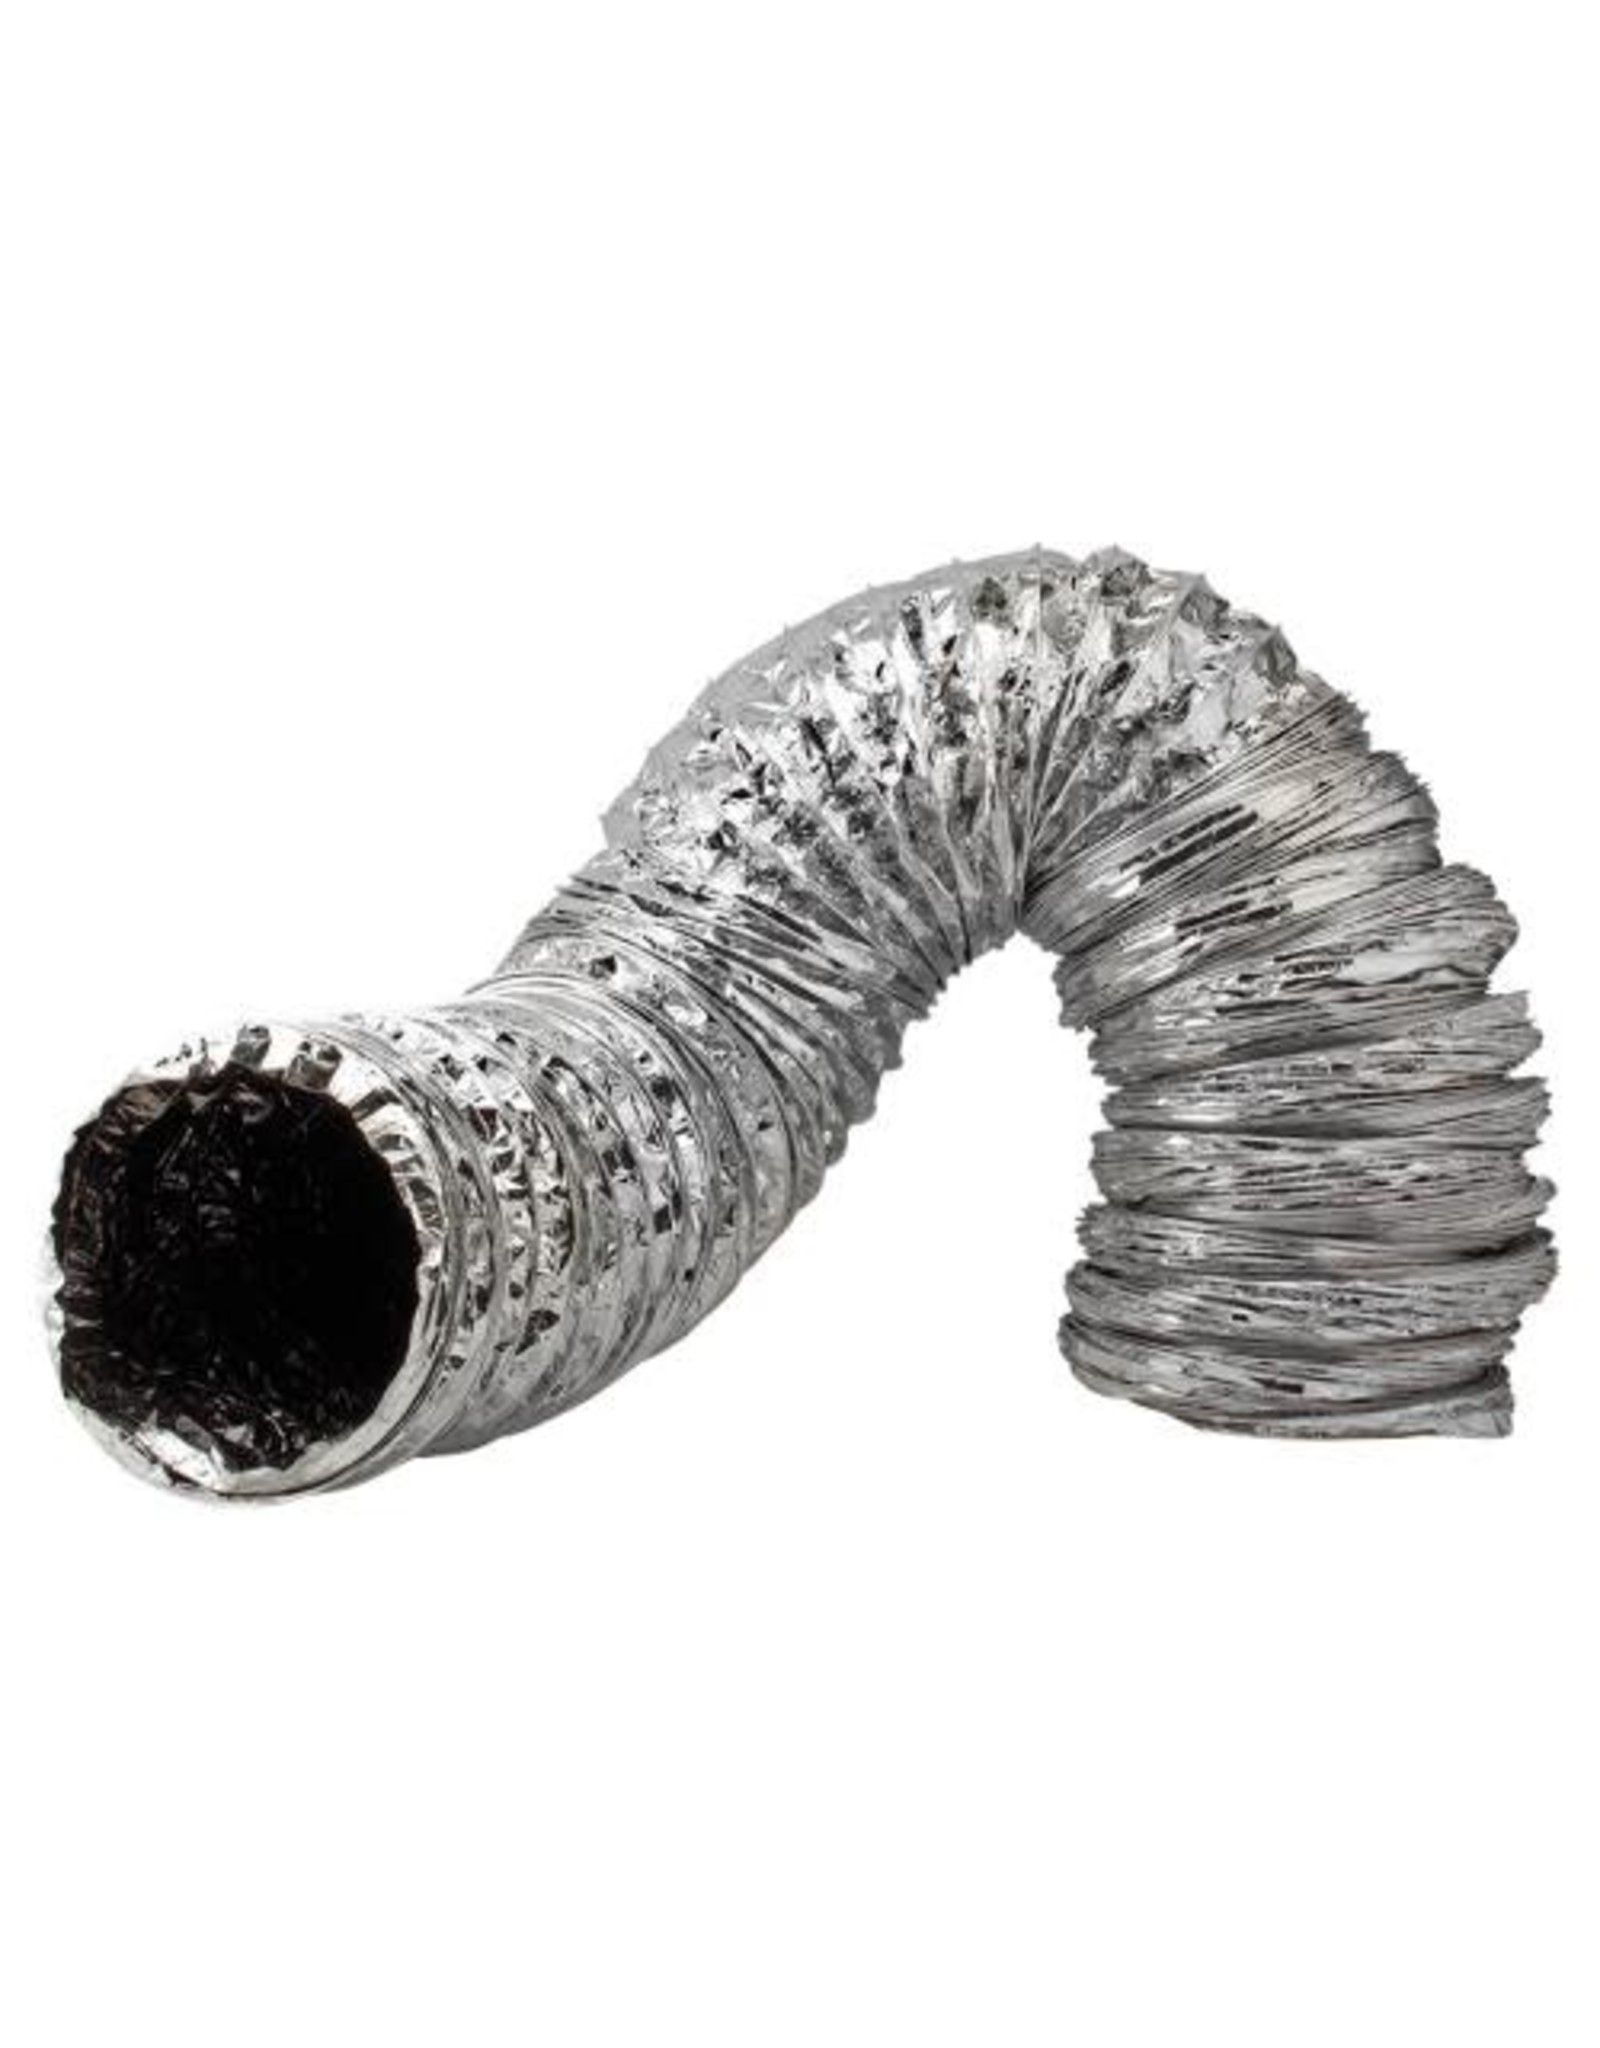 Ideal Air Ideal-Air Supreme Silver / Black Ducting 6 in x 25 ft